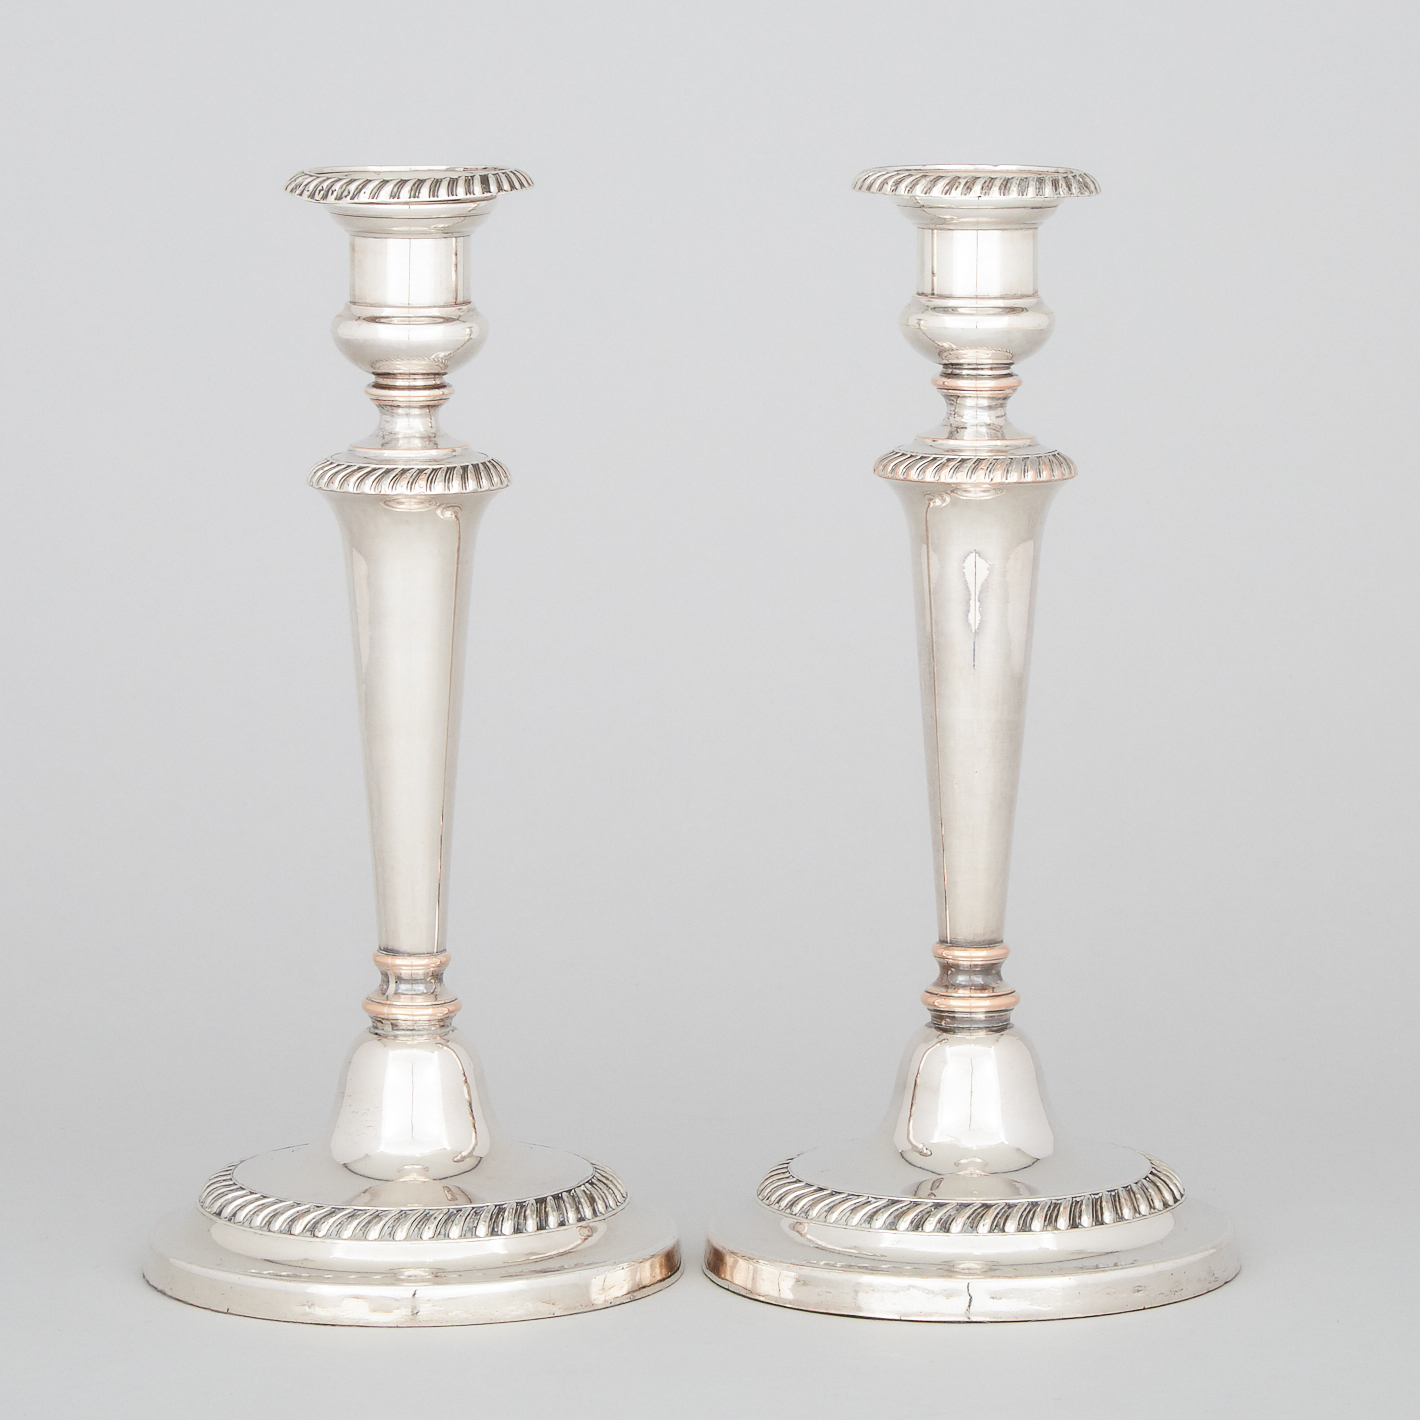 Pair of Old Sheffield Plate Table Candlesticks, c.1820